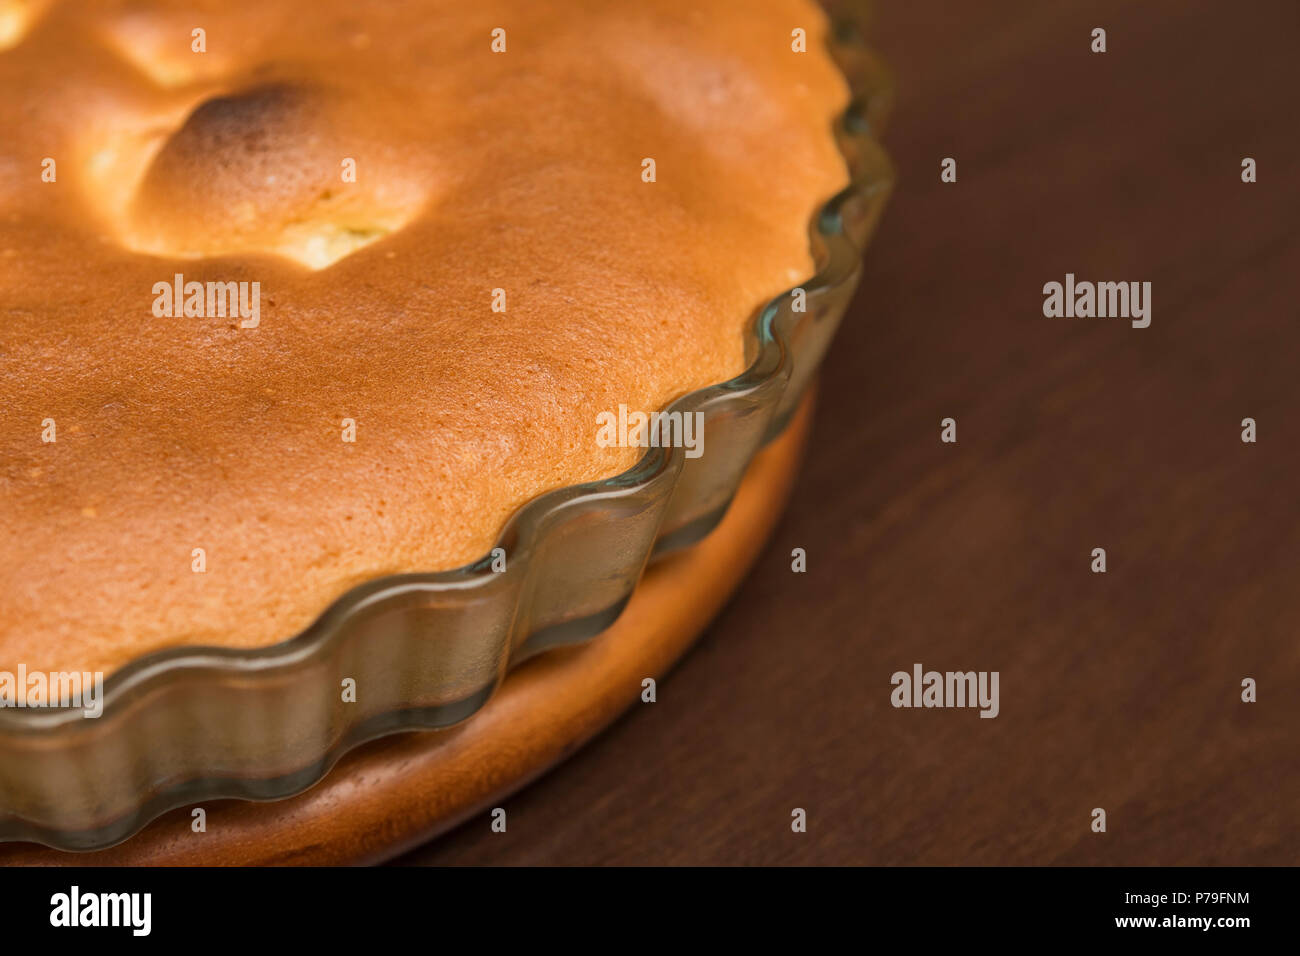 Baked pie with apples inside Stock Photo